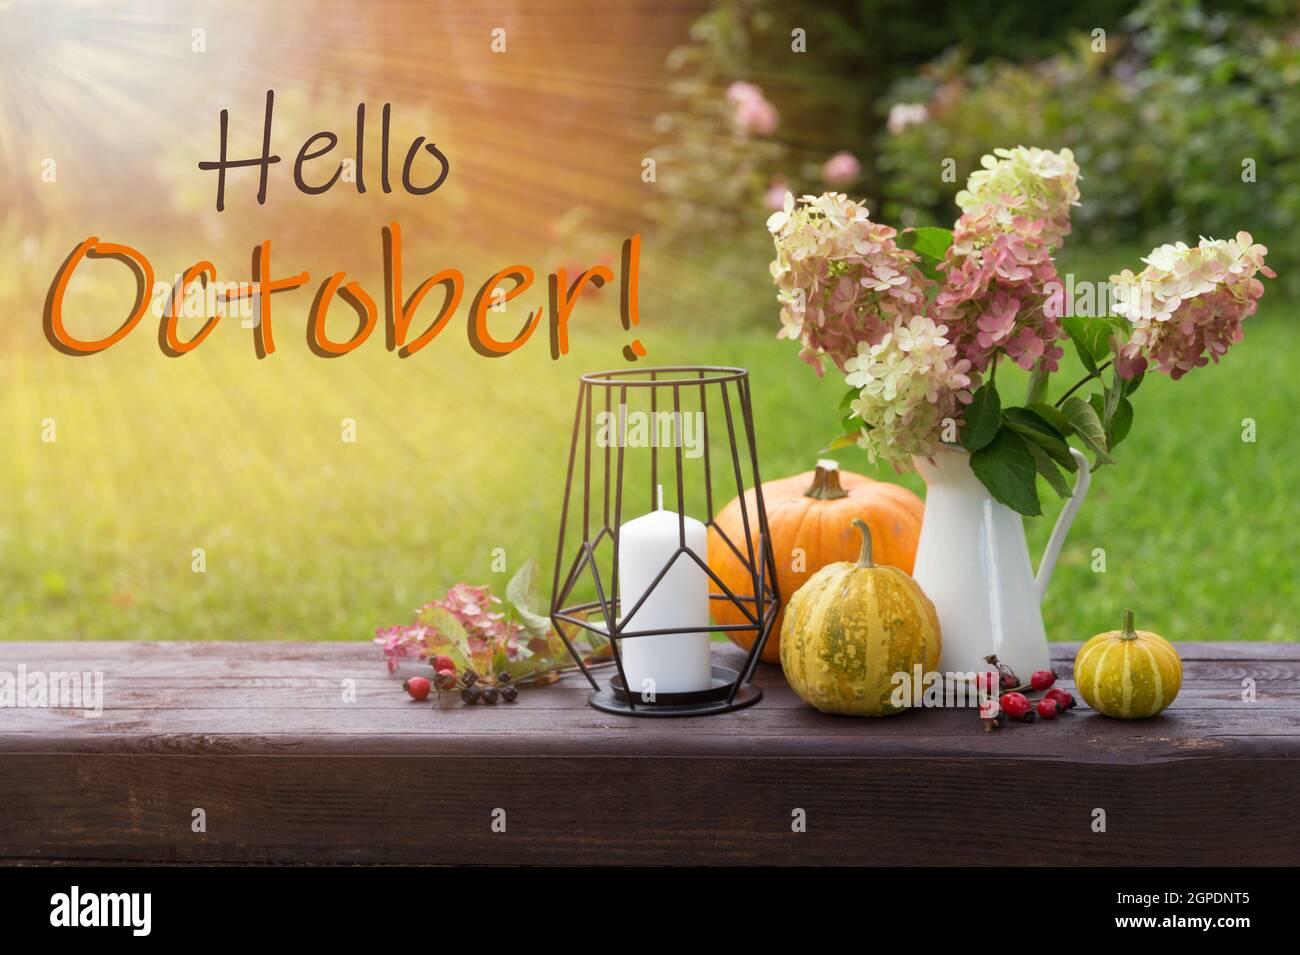 Hello October wallpaper autumn background with hydrangea flowers